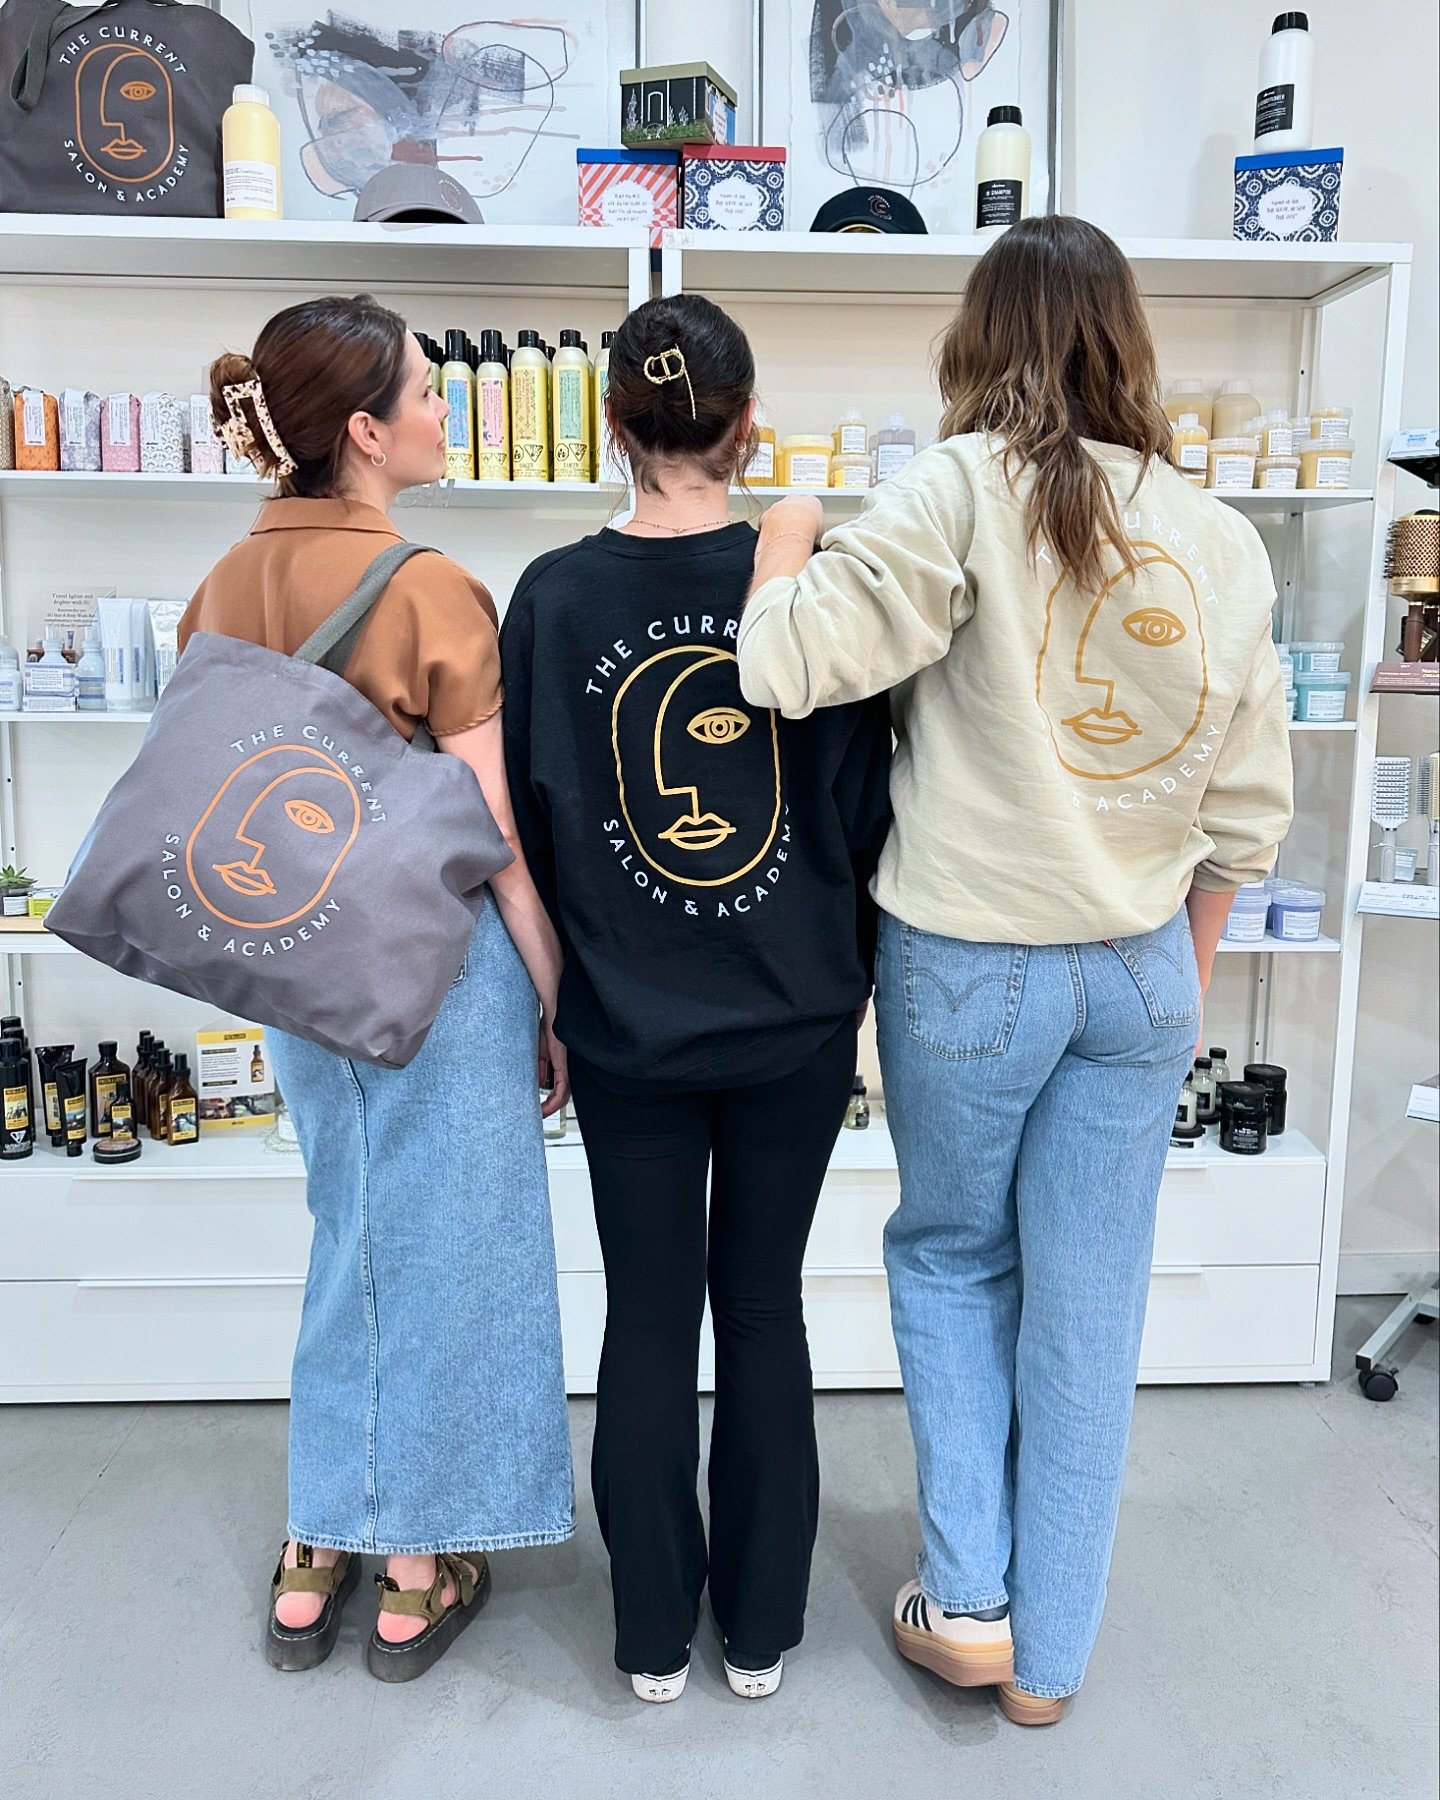 Spring is here and so is our new merch! Come check it out next time you are in :)
We have crewnecks for $50
Hats for $22
And tote bags for 20$ 

#hair #hairstylist #hairdresser #hairsalon #salon #hairtips #sweaters #merch #gifts #fun #princegeorge #y